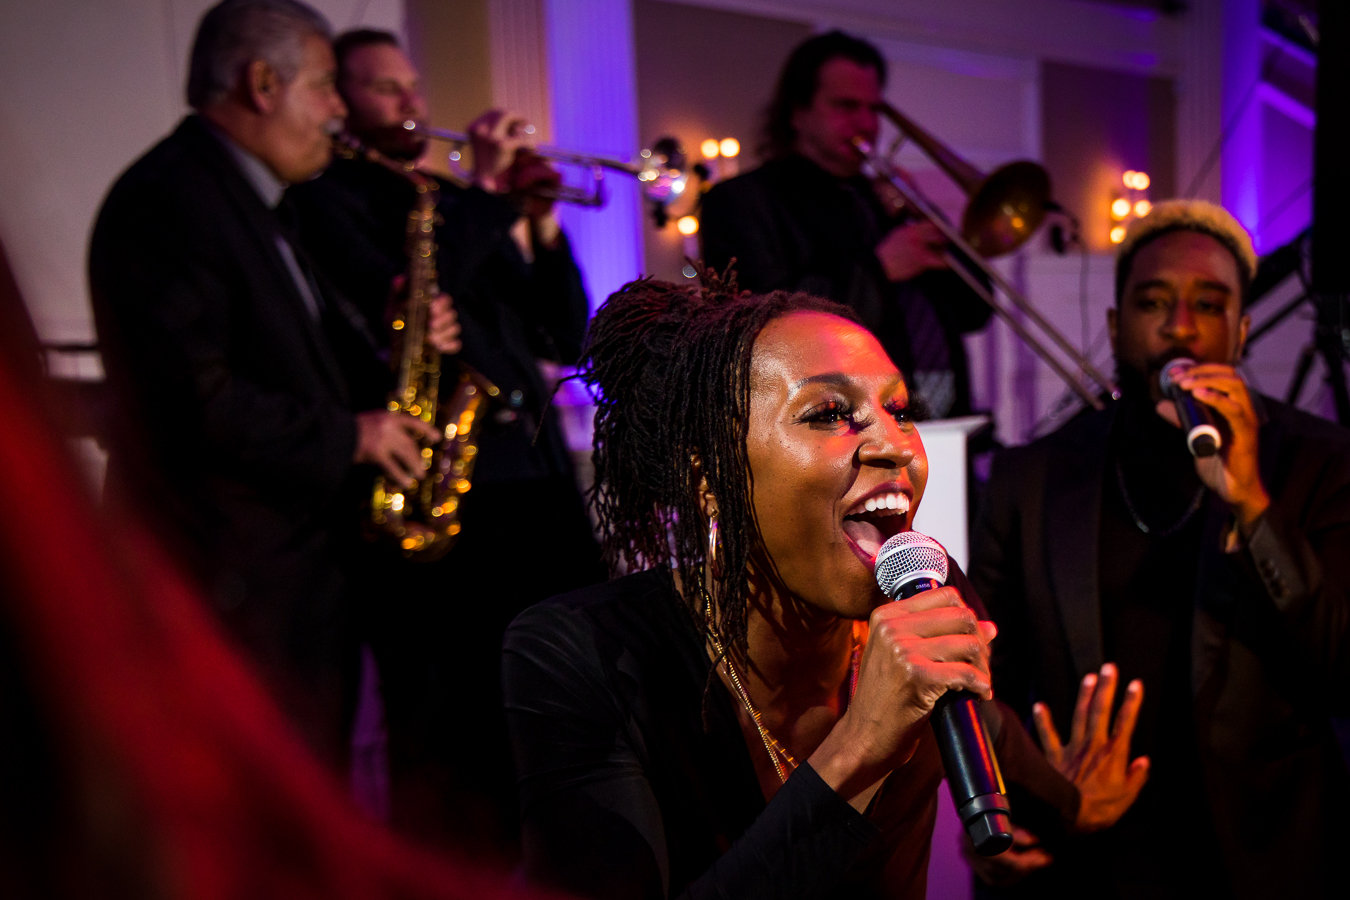 creative NJ Wedding Photographer, lisa rhinehart, captures this creative, unique image of the live band from the wedding with the singer front and center 